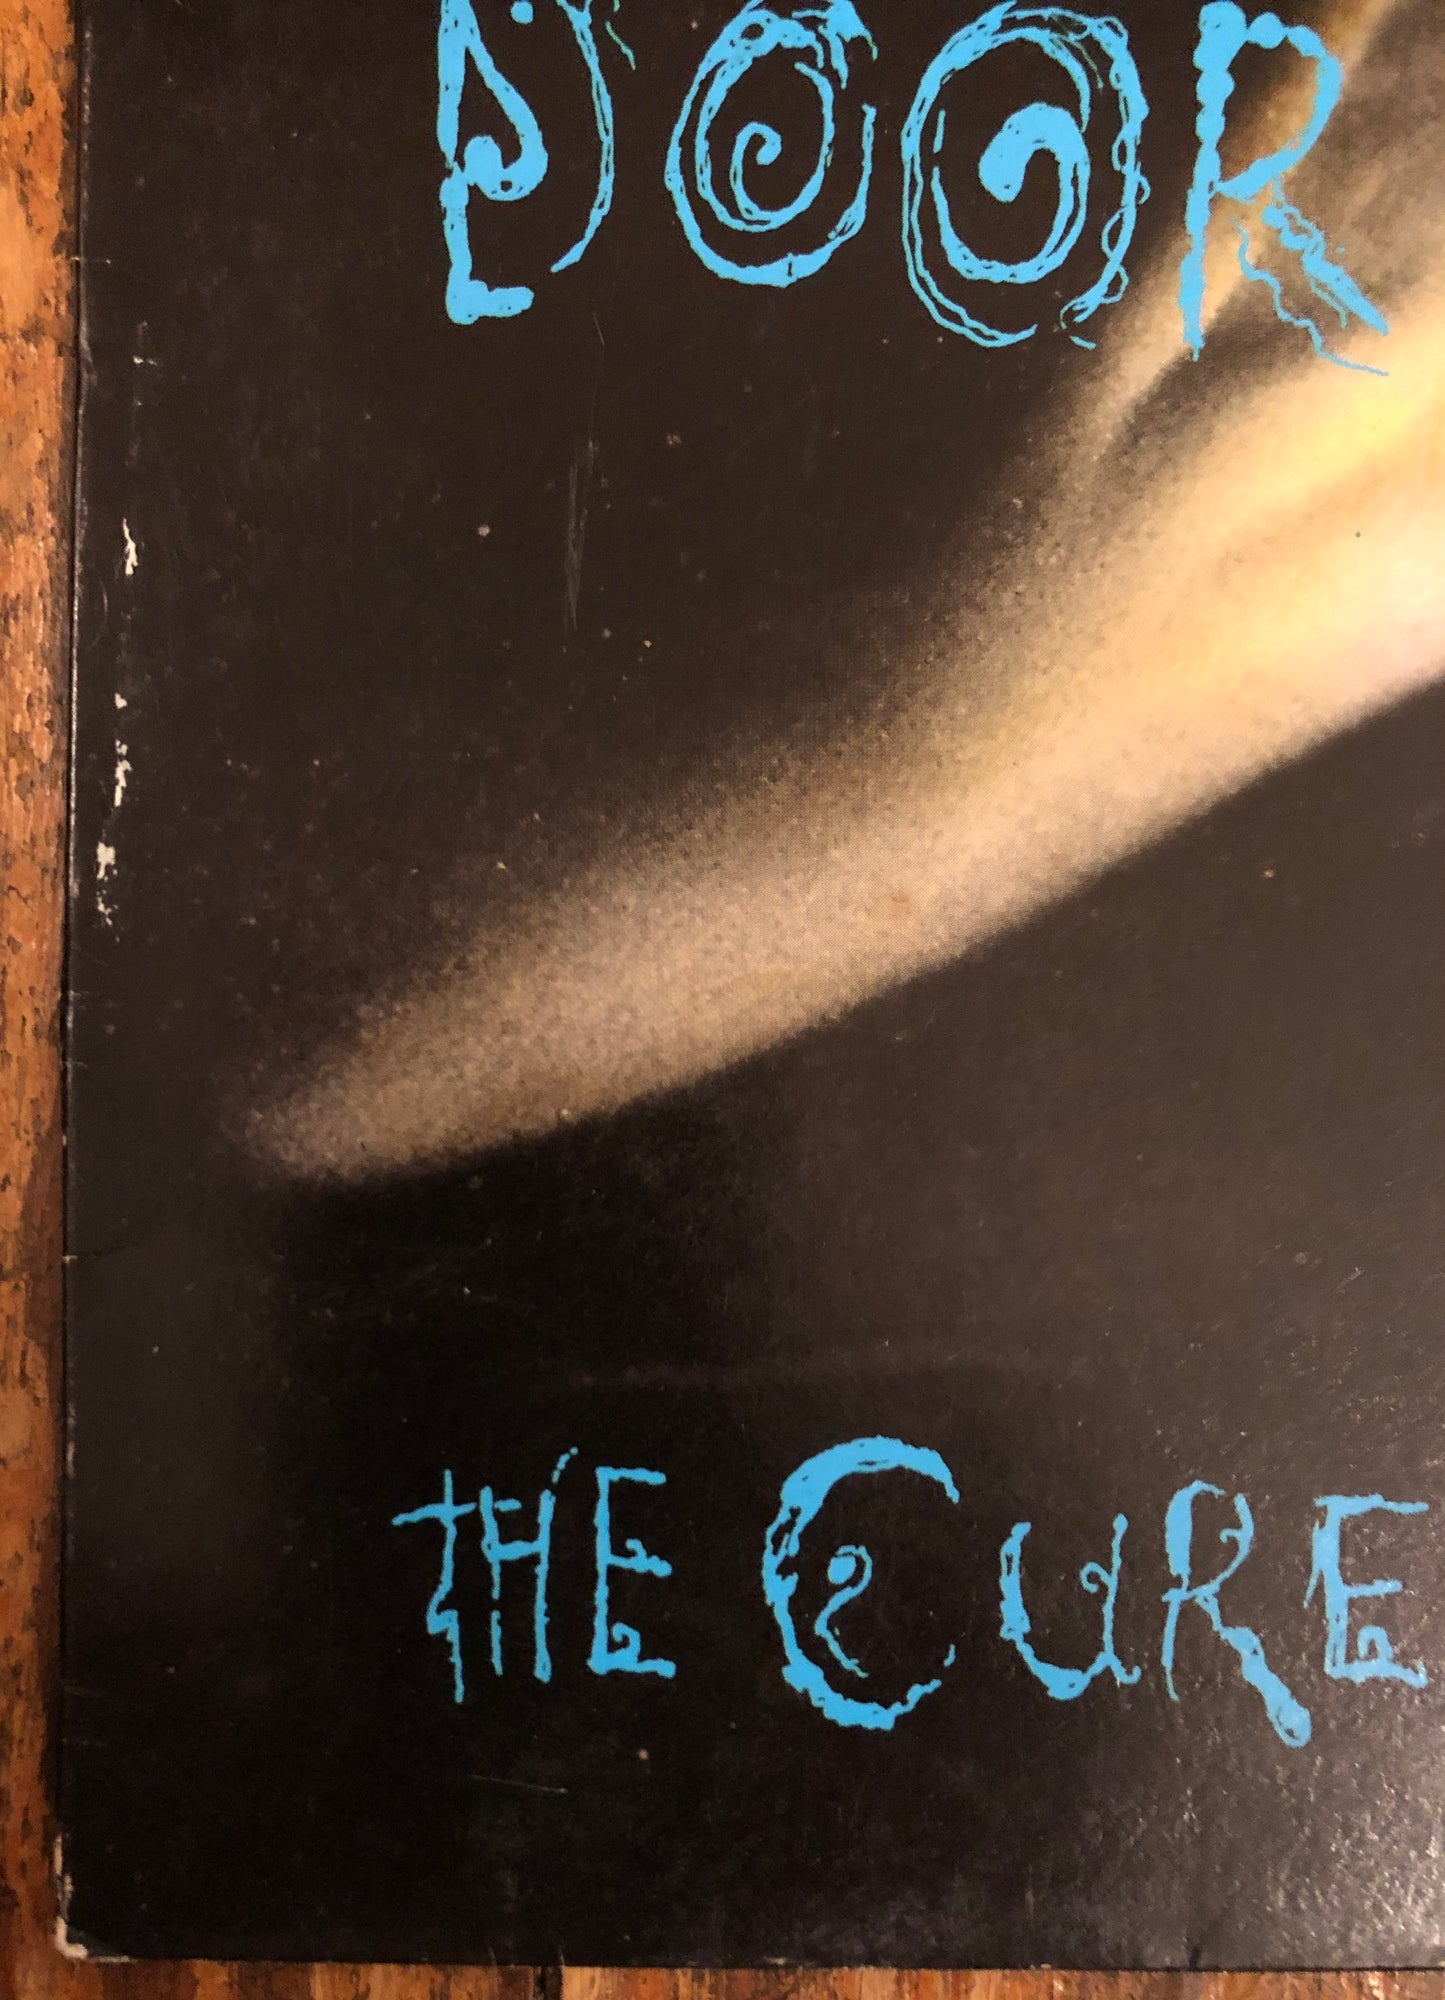 CURE, THE "The Head on the Door"